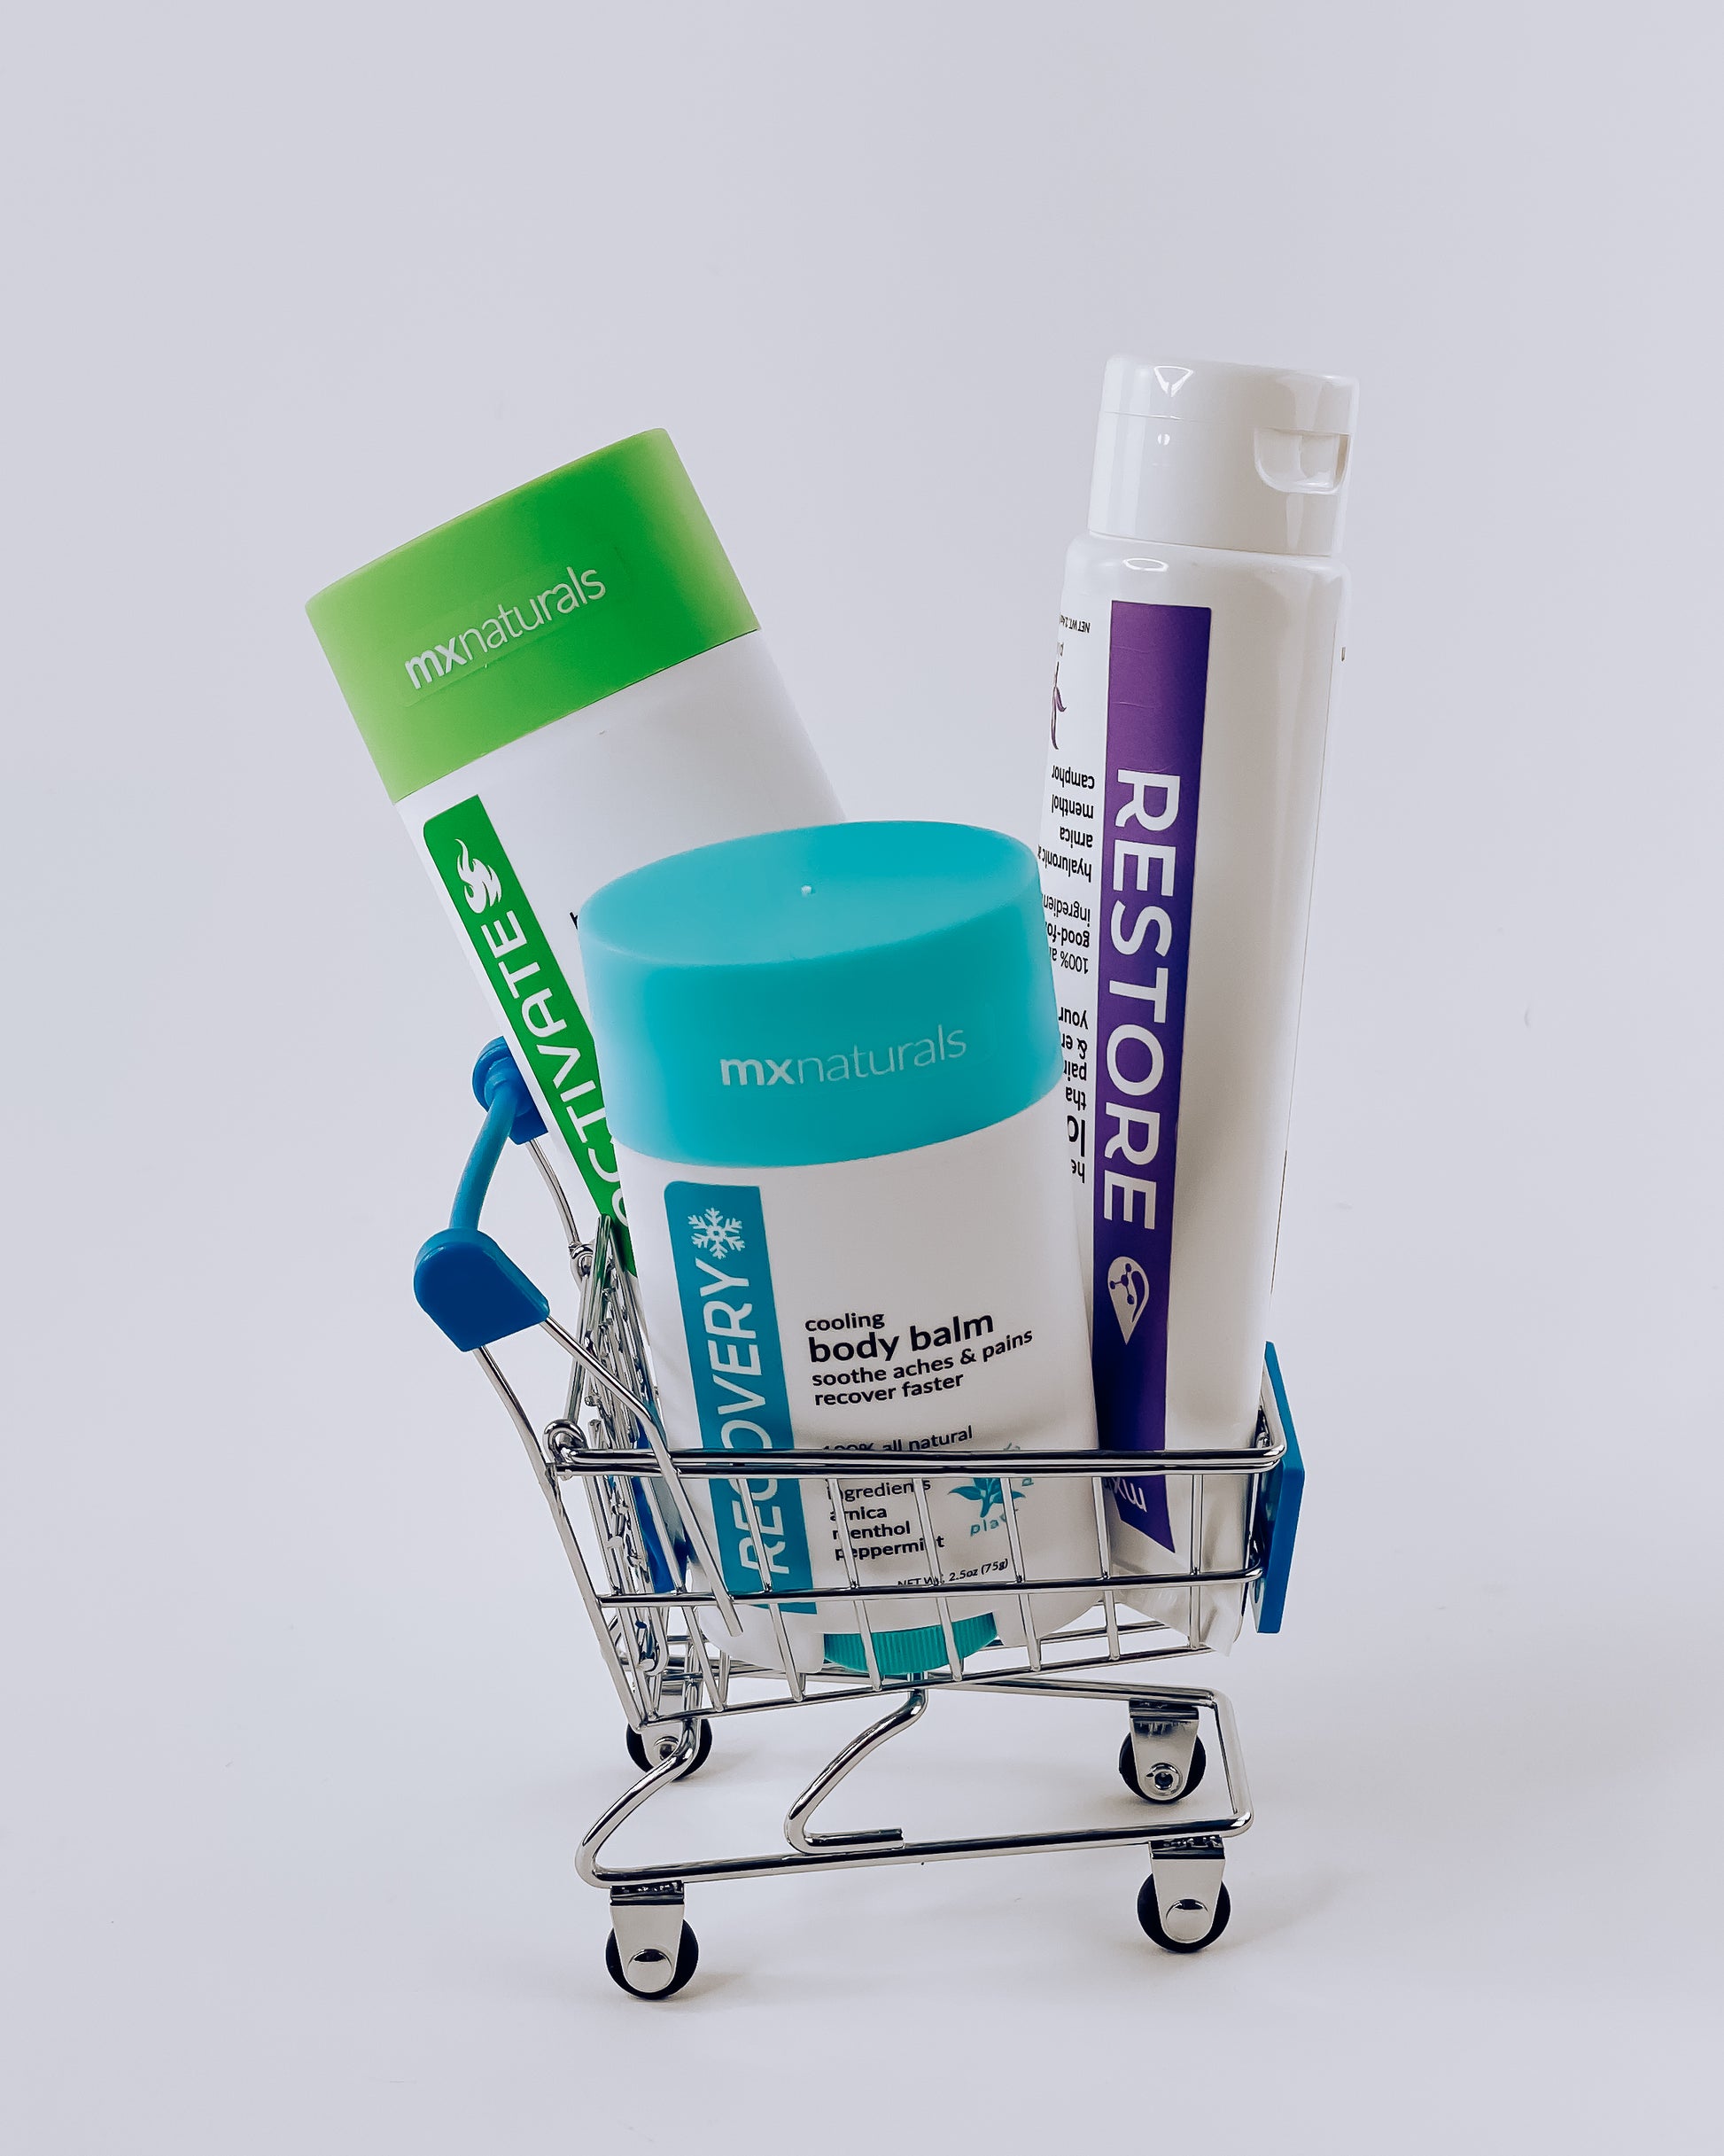 white background with two pain relief balms, activate heated body balm and recovery cooling body balm, in a tiny shopping cart with a tube of restore targeted healing lotion 